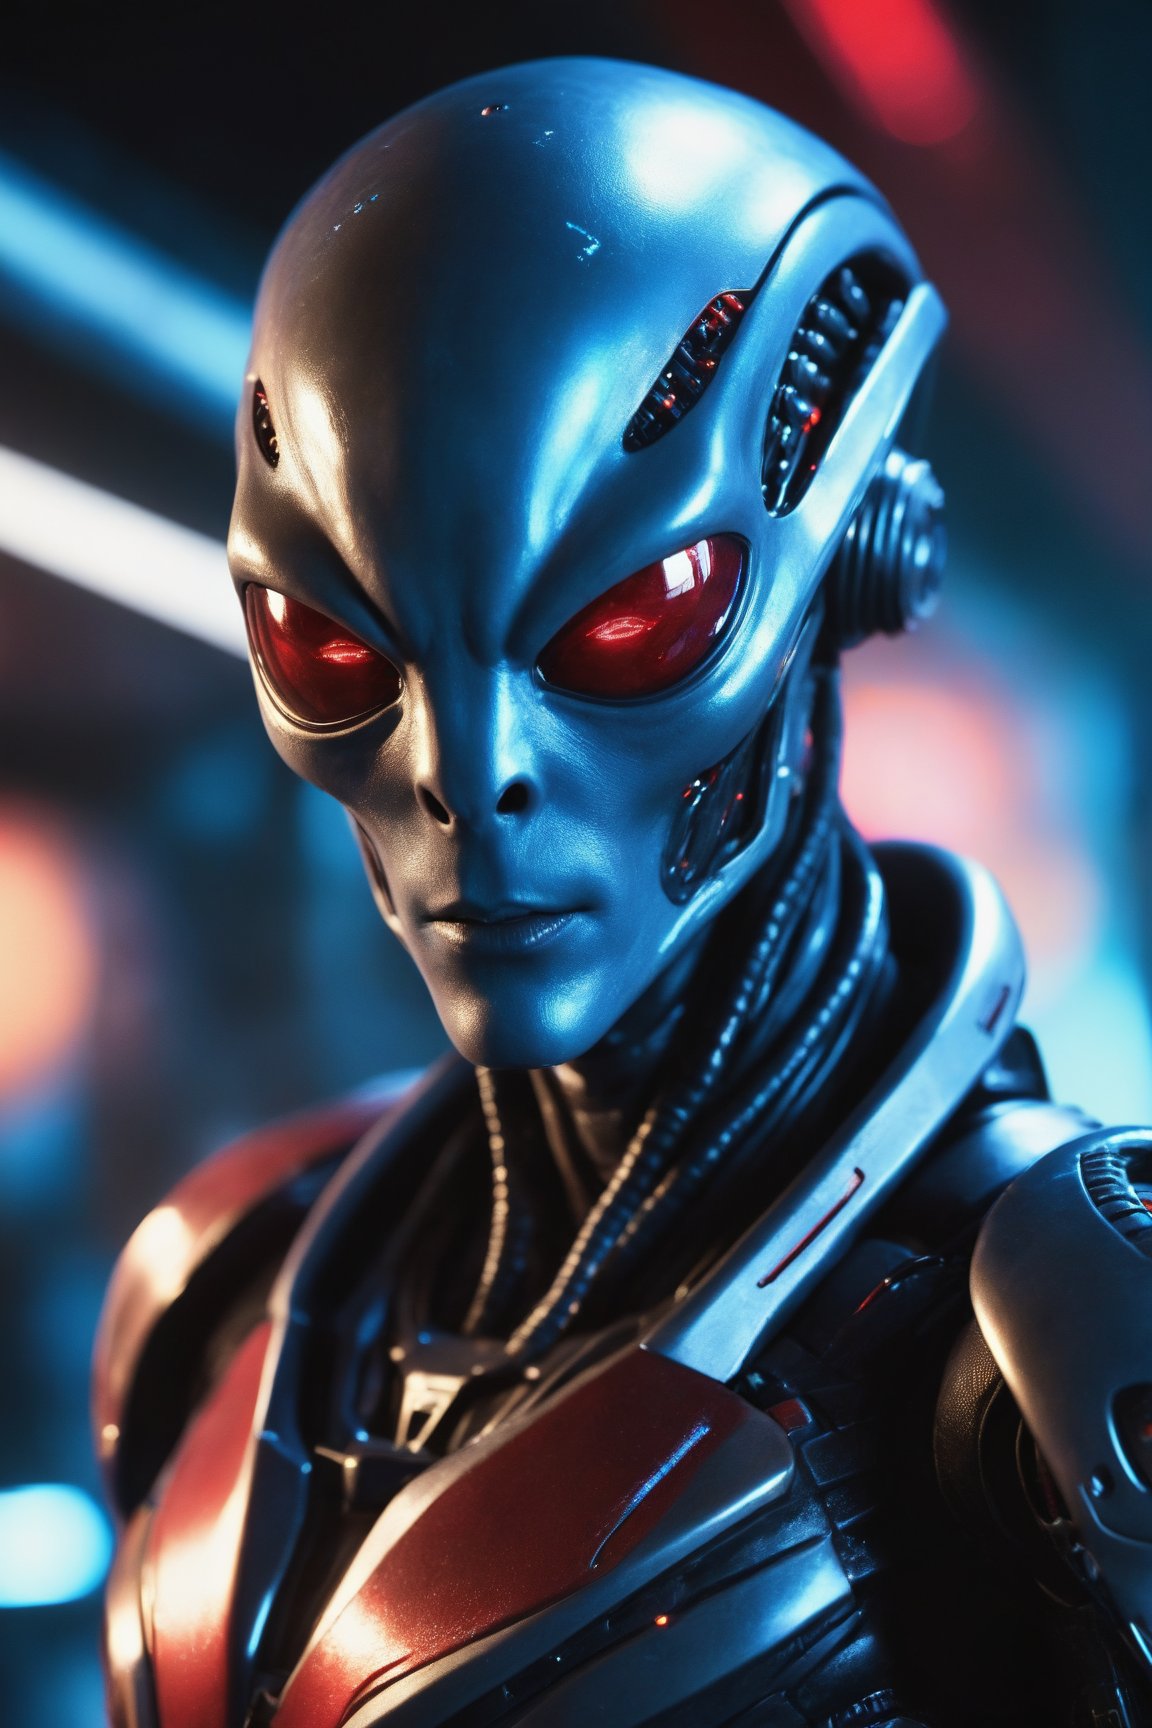 A cinematic still of an alien being with cybernetic eyes, in a scifi style, with detailed skin texture and light reflections on the eye makeup. Blue lighting is in his left eye and red glowing lights are around it. The background is blurred to focus attention on him, holding what appears to be a laser gun or weapon. He has silver metallic armorlike and there are some mechanical parts attached from where he was modified